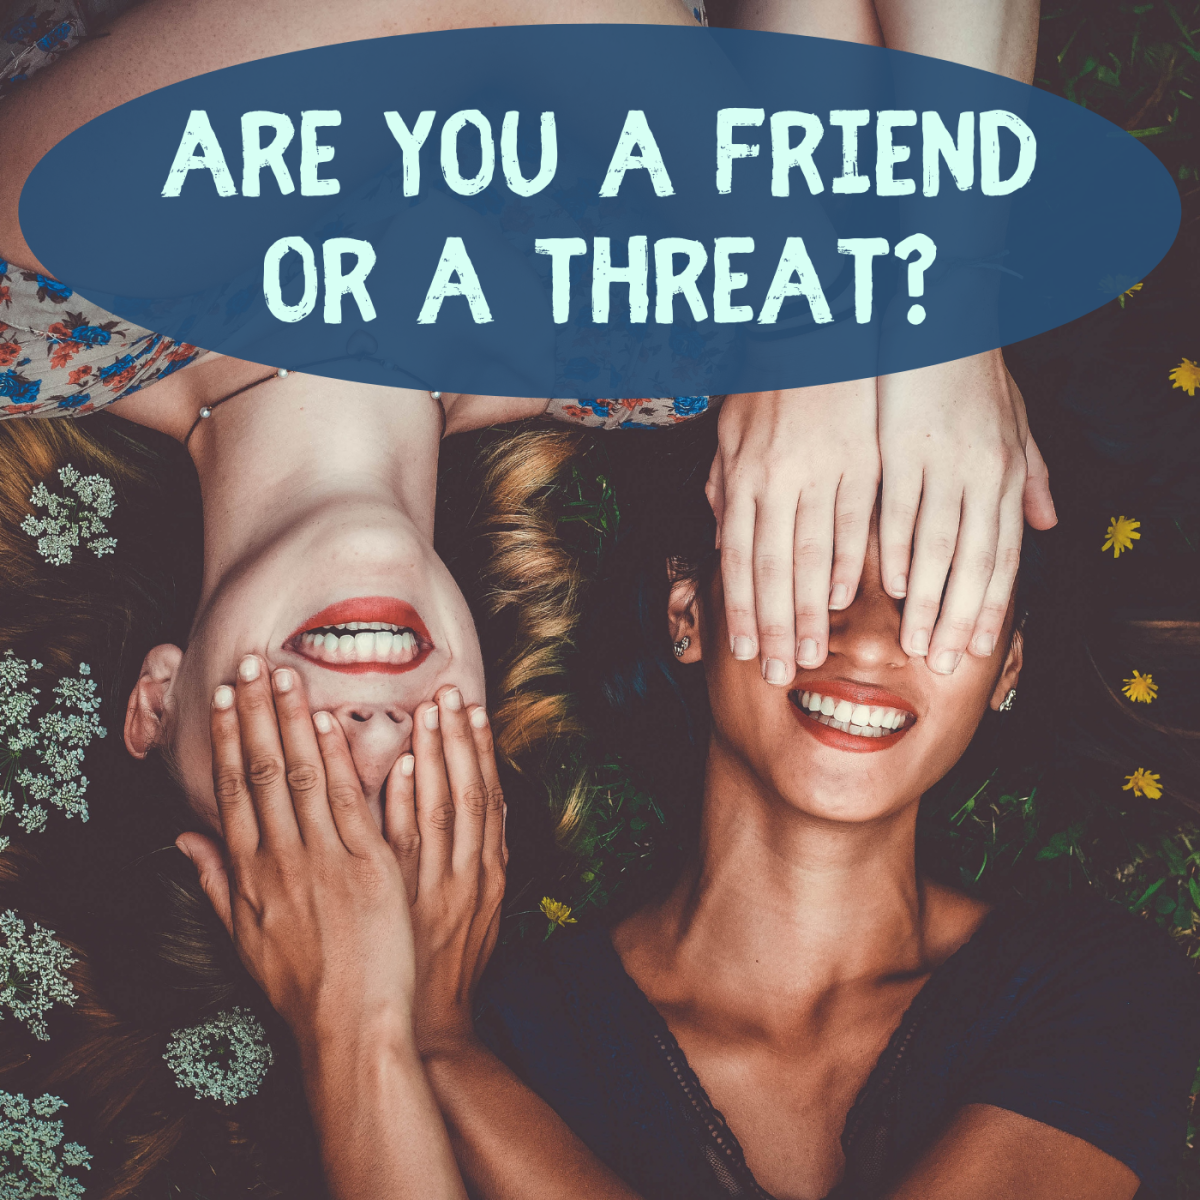 10 Things That Make a Woman Threatening to Other Women